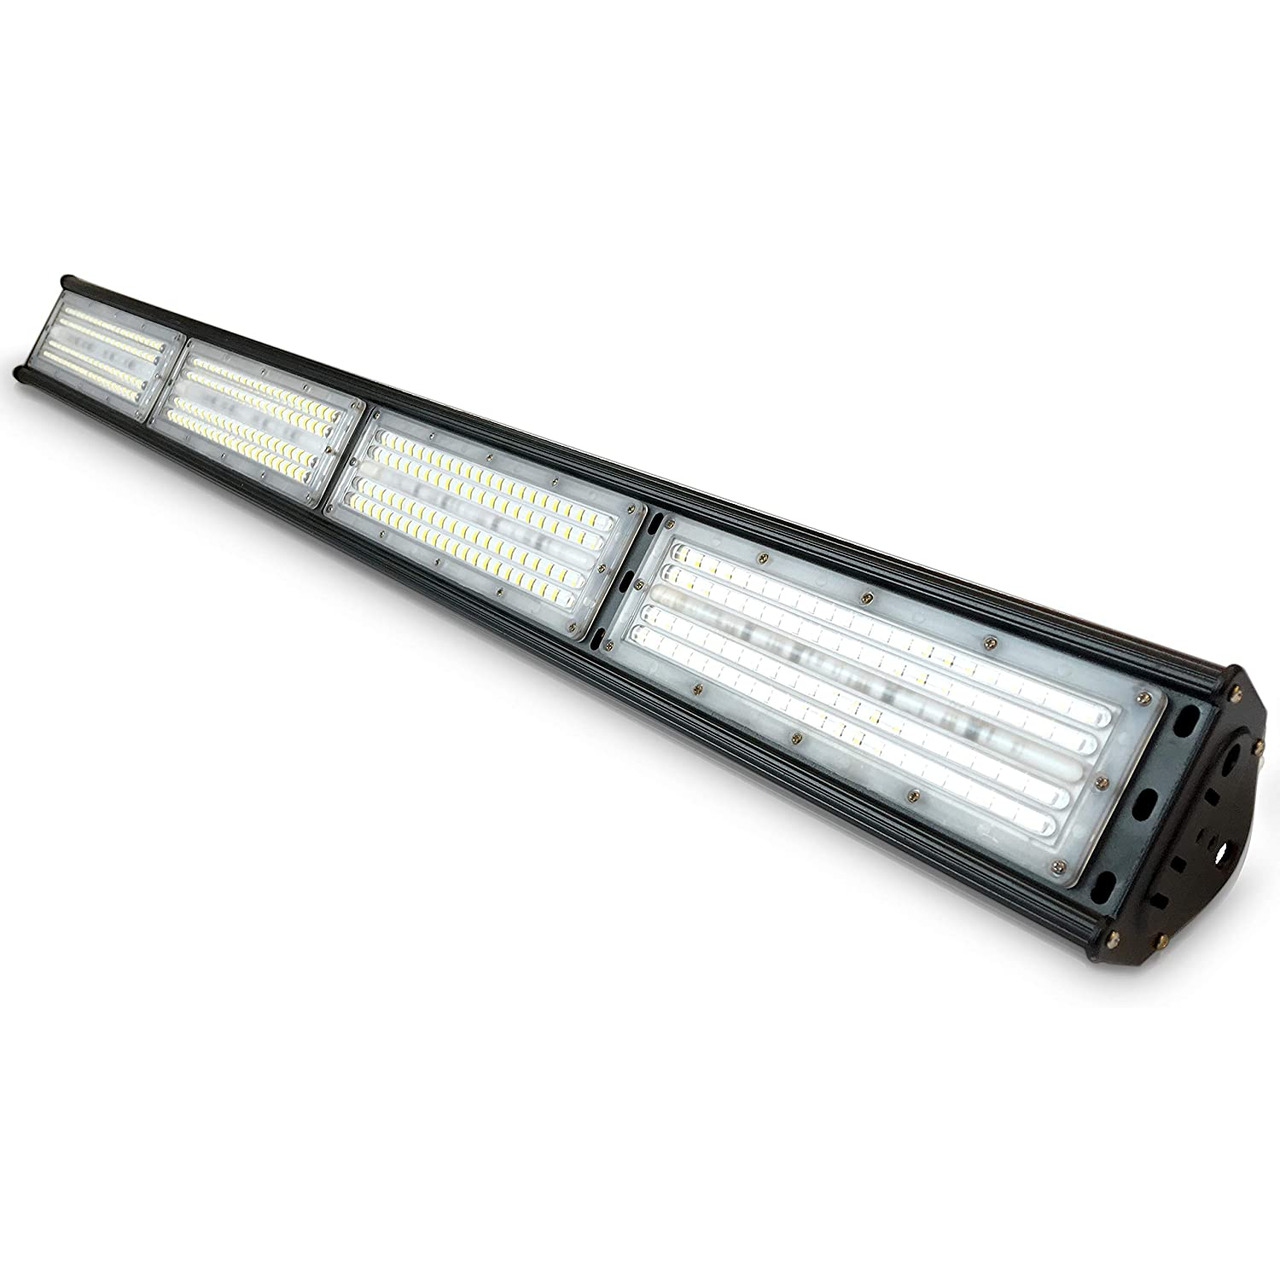 ENOVALITE 200-W-LED-Strahler Linear-HighBay 200-  24000 lm- 120 lm-W- 5000 K- neutralweiss- IP65 unter Beleuchtung